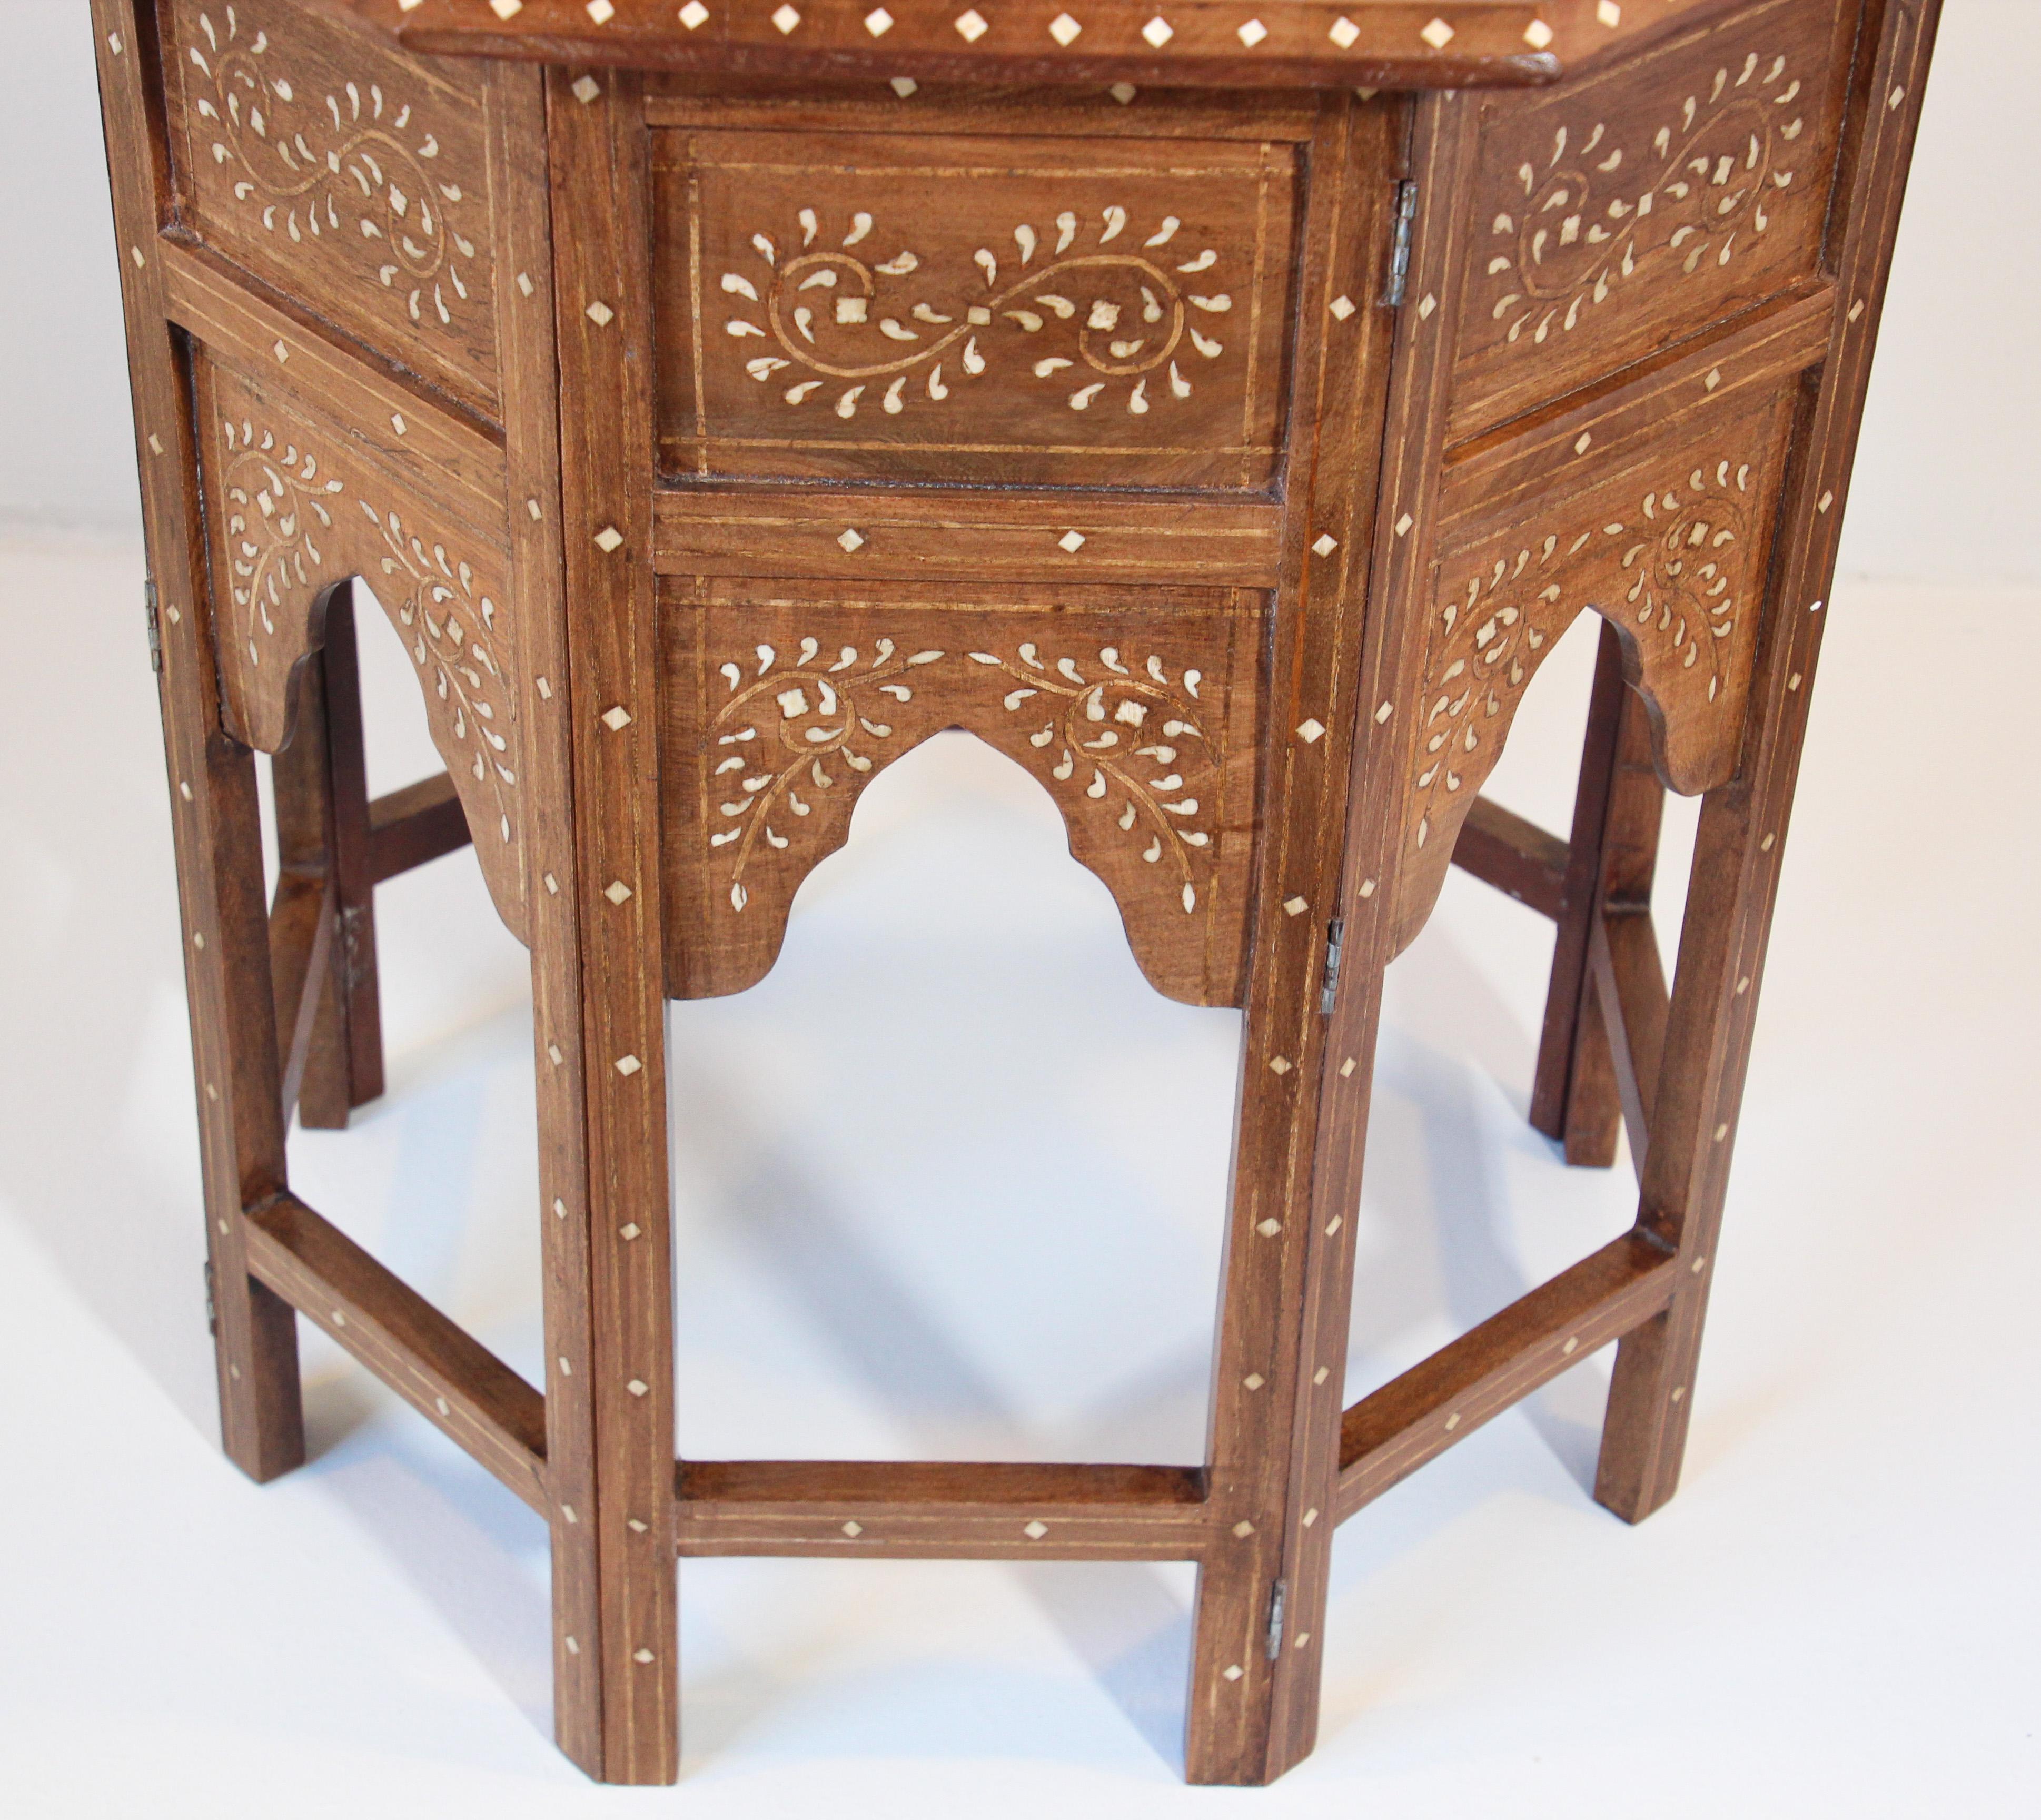 20th Century Anglo-Indian Octagonal Mughal Moorish Table with Inlay India